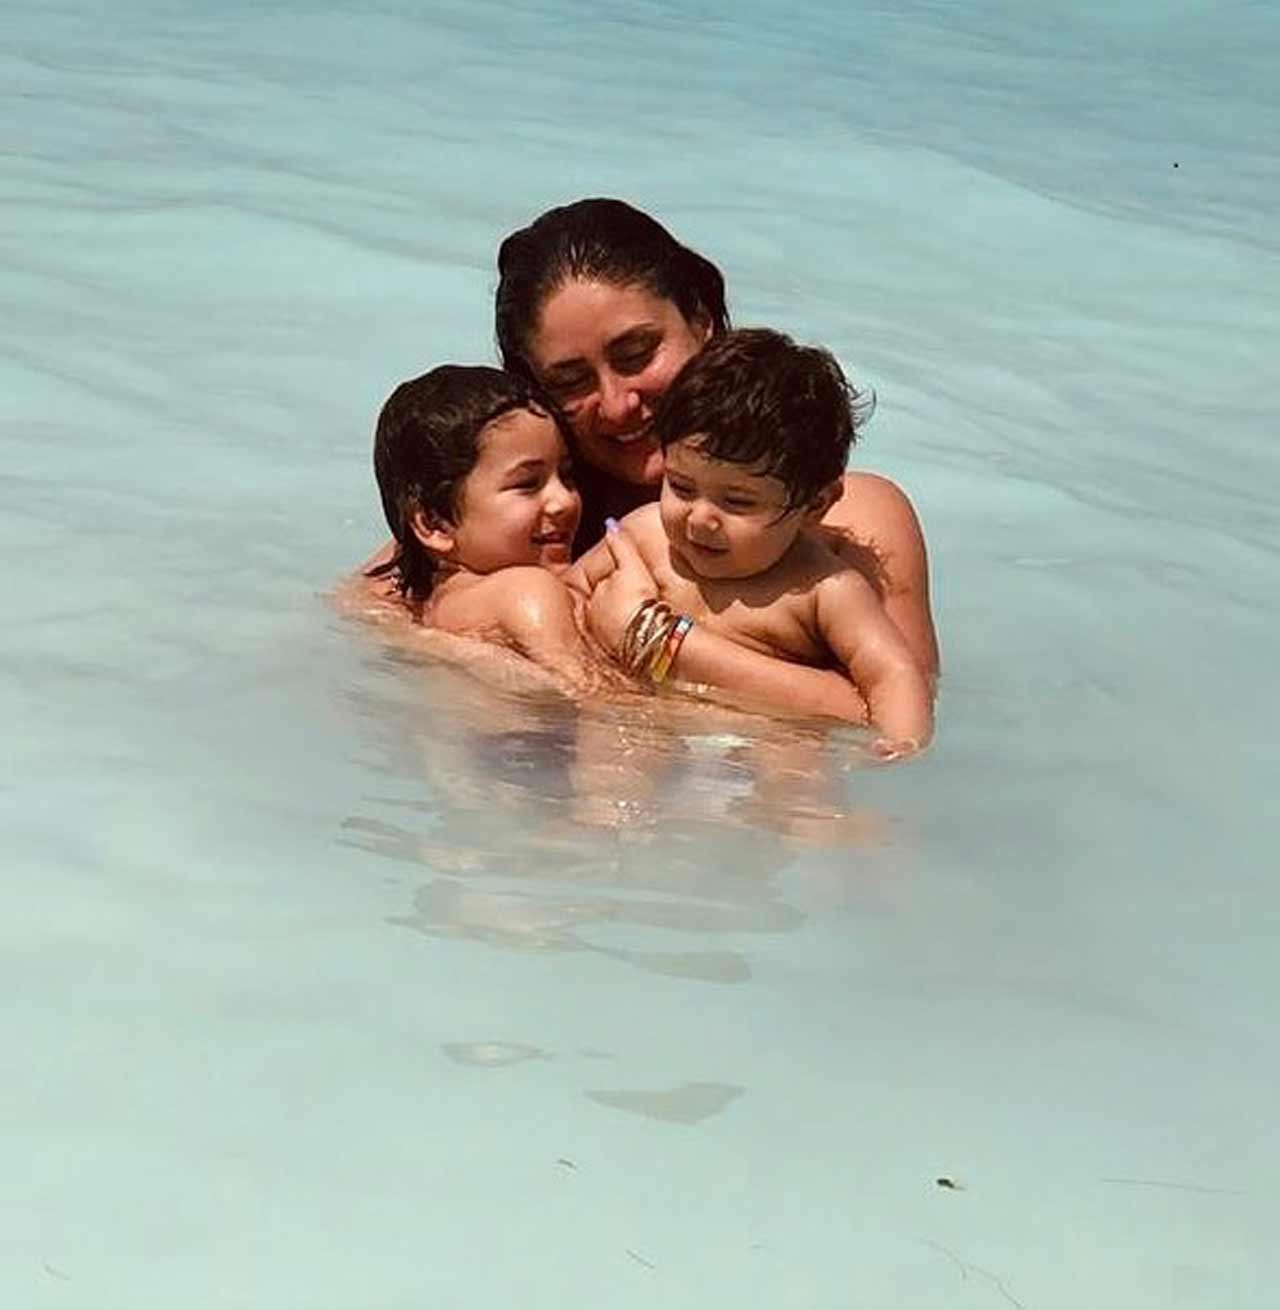 Kareena Kapoor Khan shared an adorbale picture with her munchkins Taimur Ali Khan and Jehangir Ali Khan in a swimming pool. She wrote- 